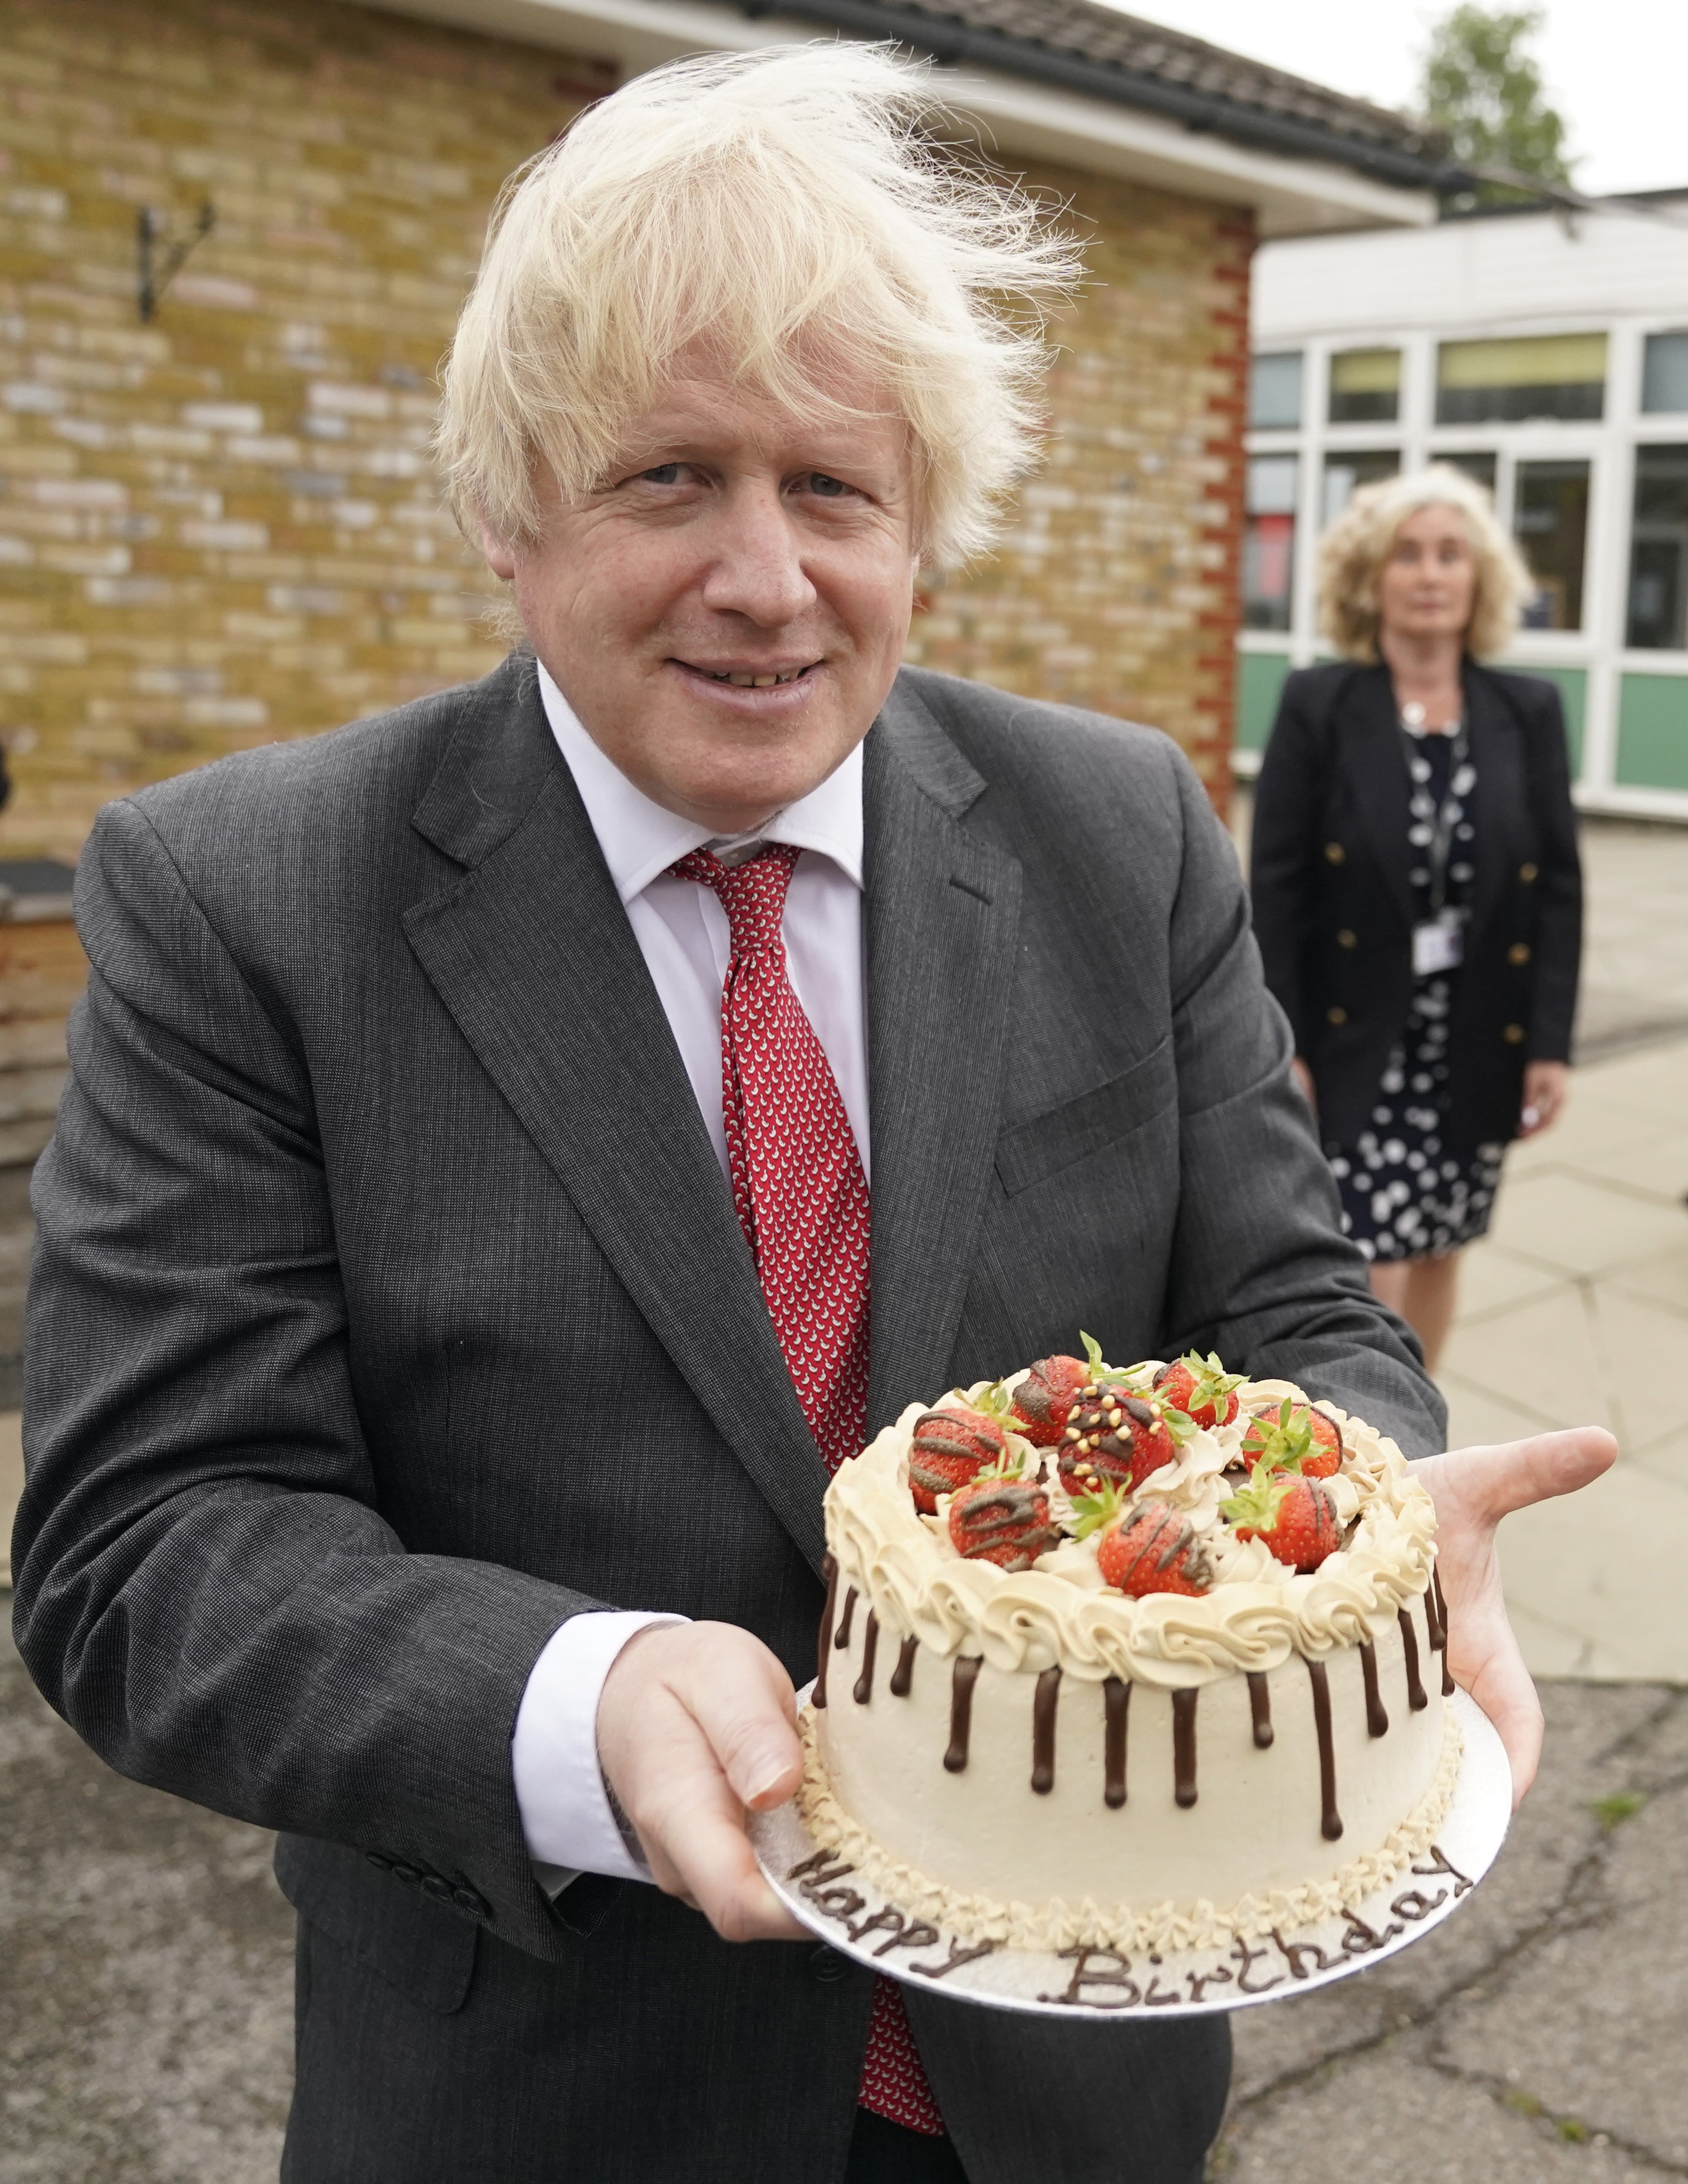 Boris Johnson was pictured with a cake made for him by pupils during a visit to a school on his birthday in 2020 (Andrew Parsons/Downing Street/PA)